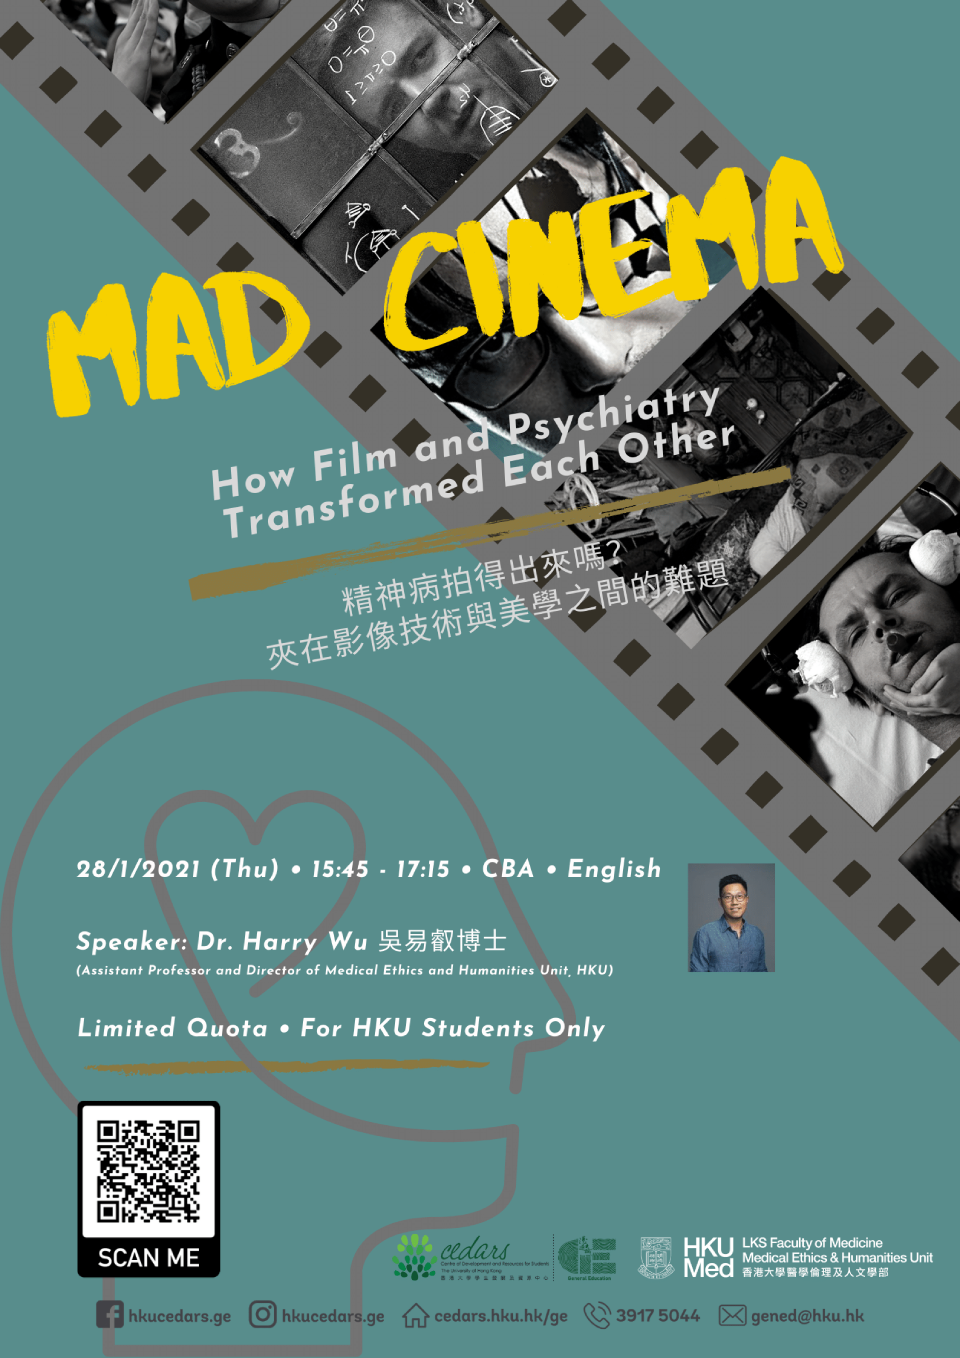 Mad Cinema: How Film and Psychiatry Transformed Each Other